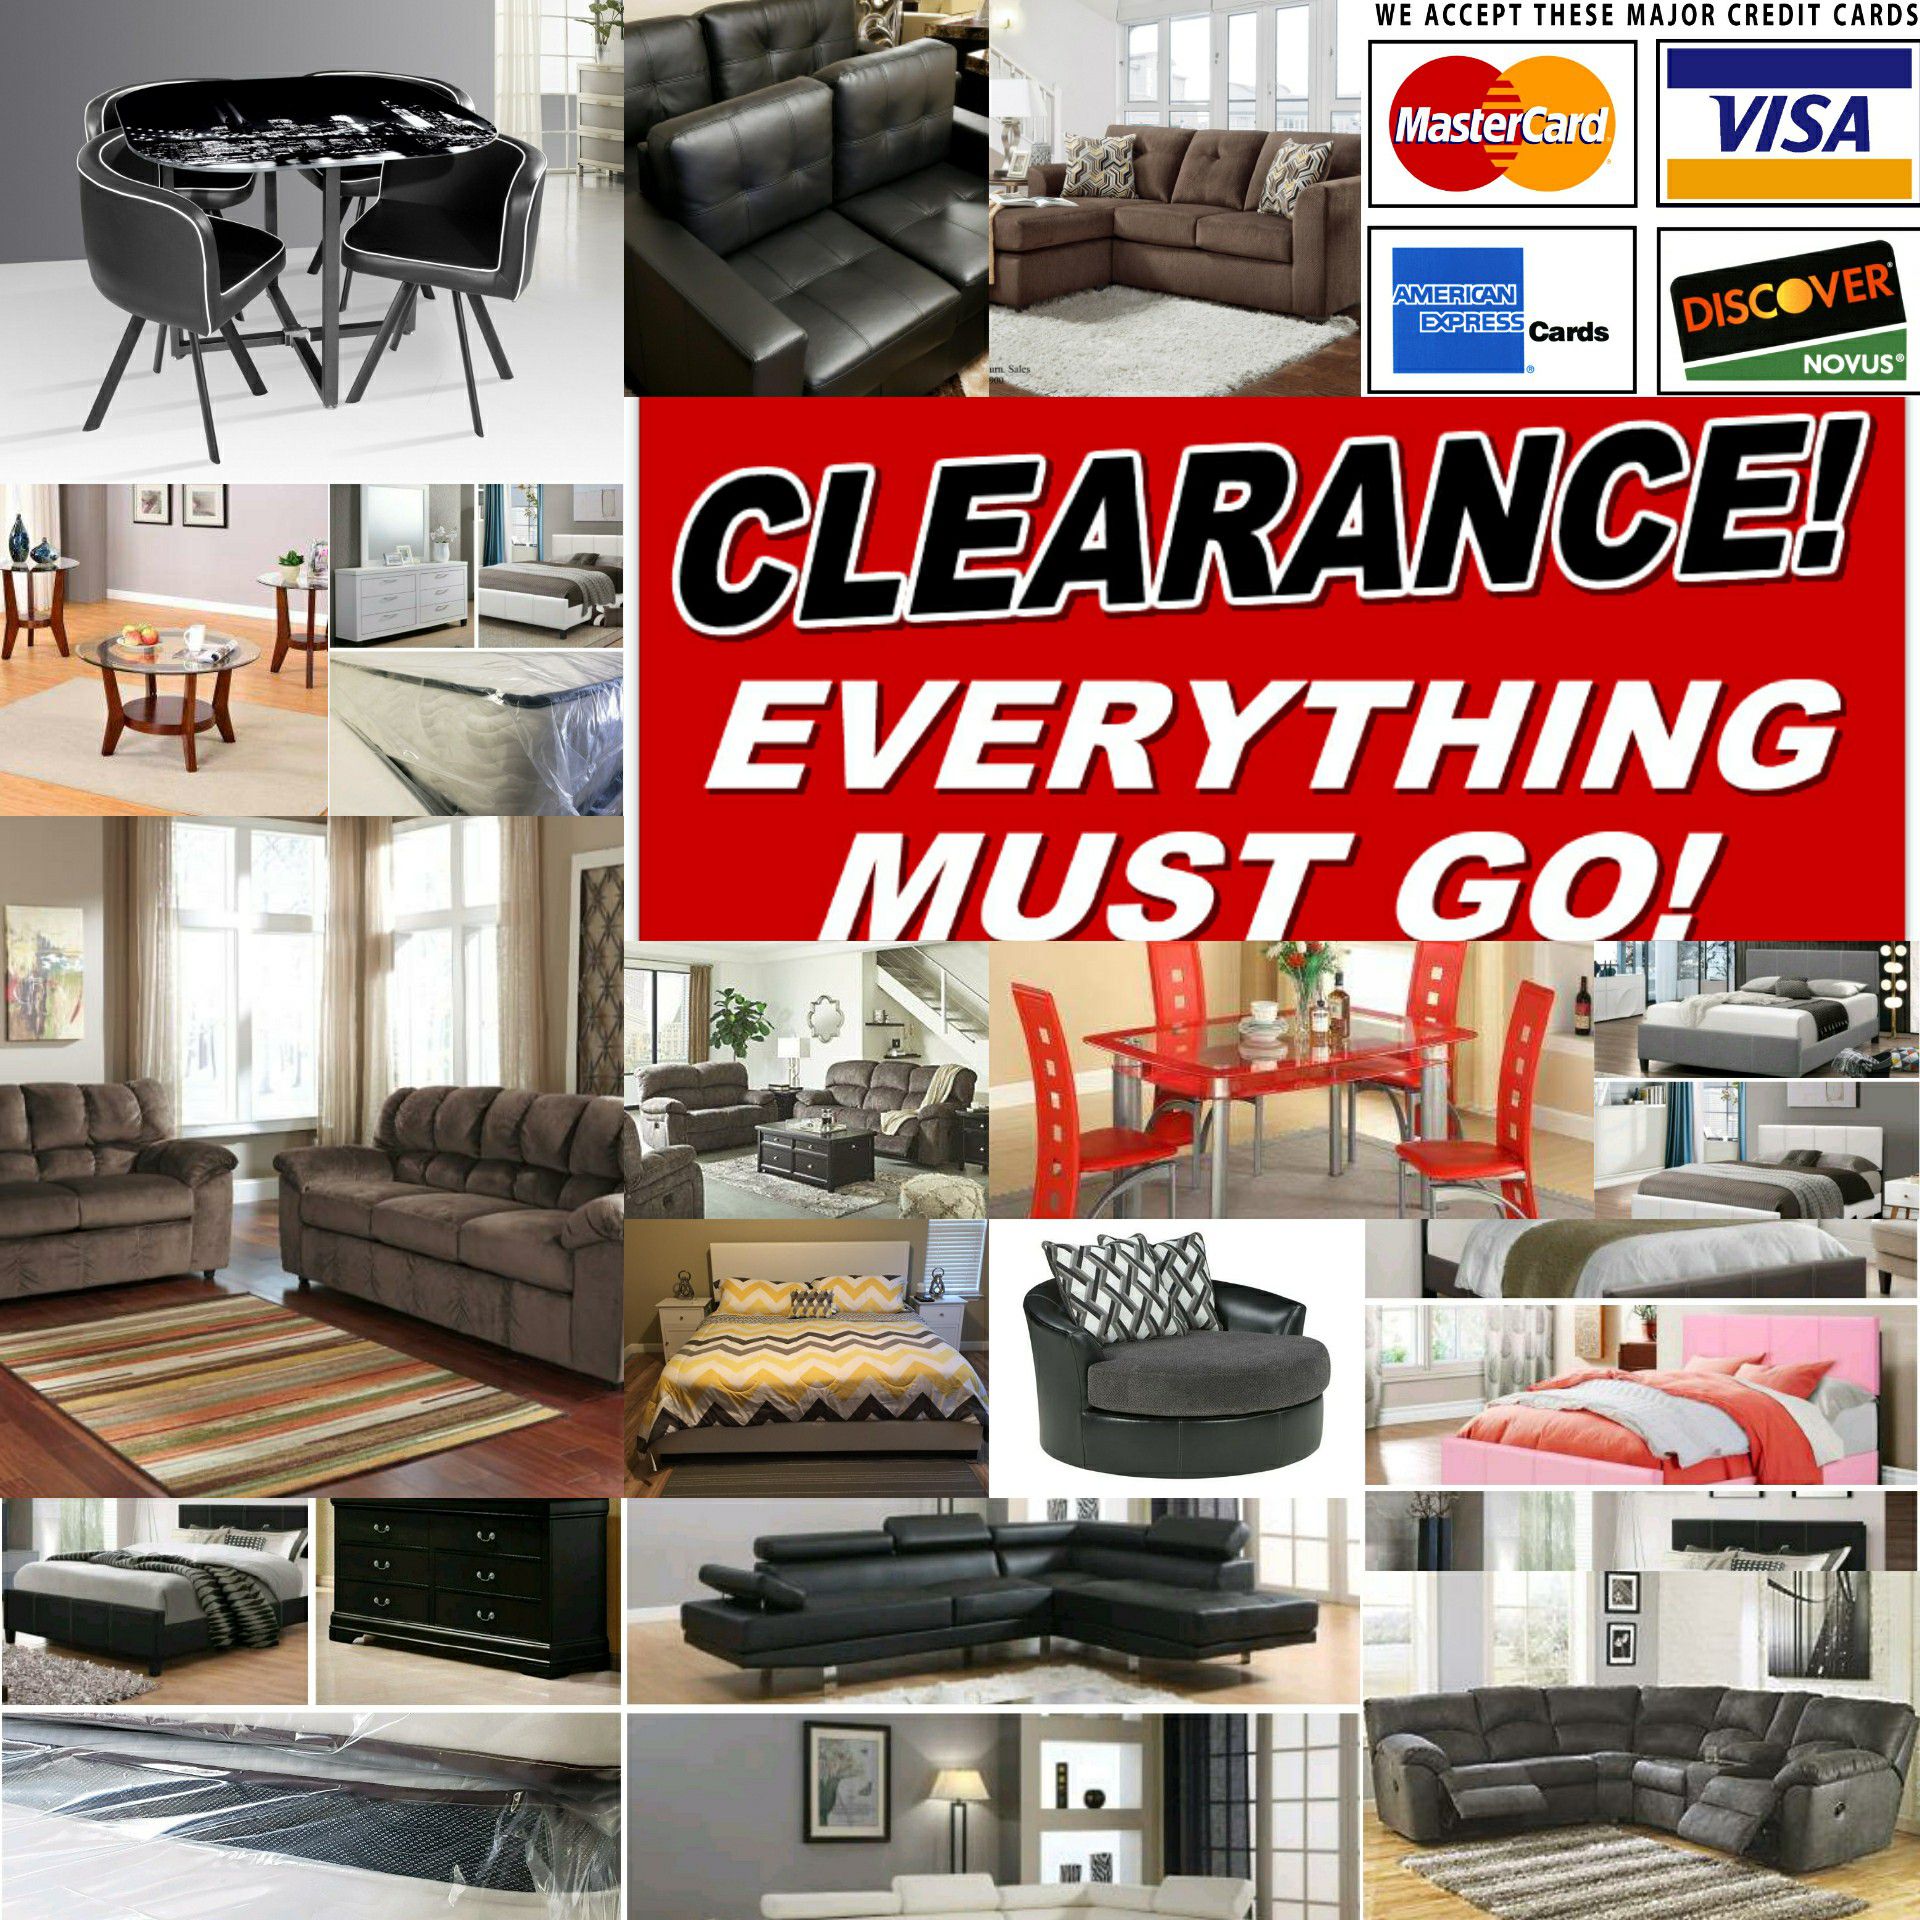 Huge Black Friday Sale! | Sectionals @$399 | Dining Sets @$225 | Bed & Mattress Sets @$180 | Get These Deals While They Last | Financing Available